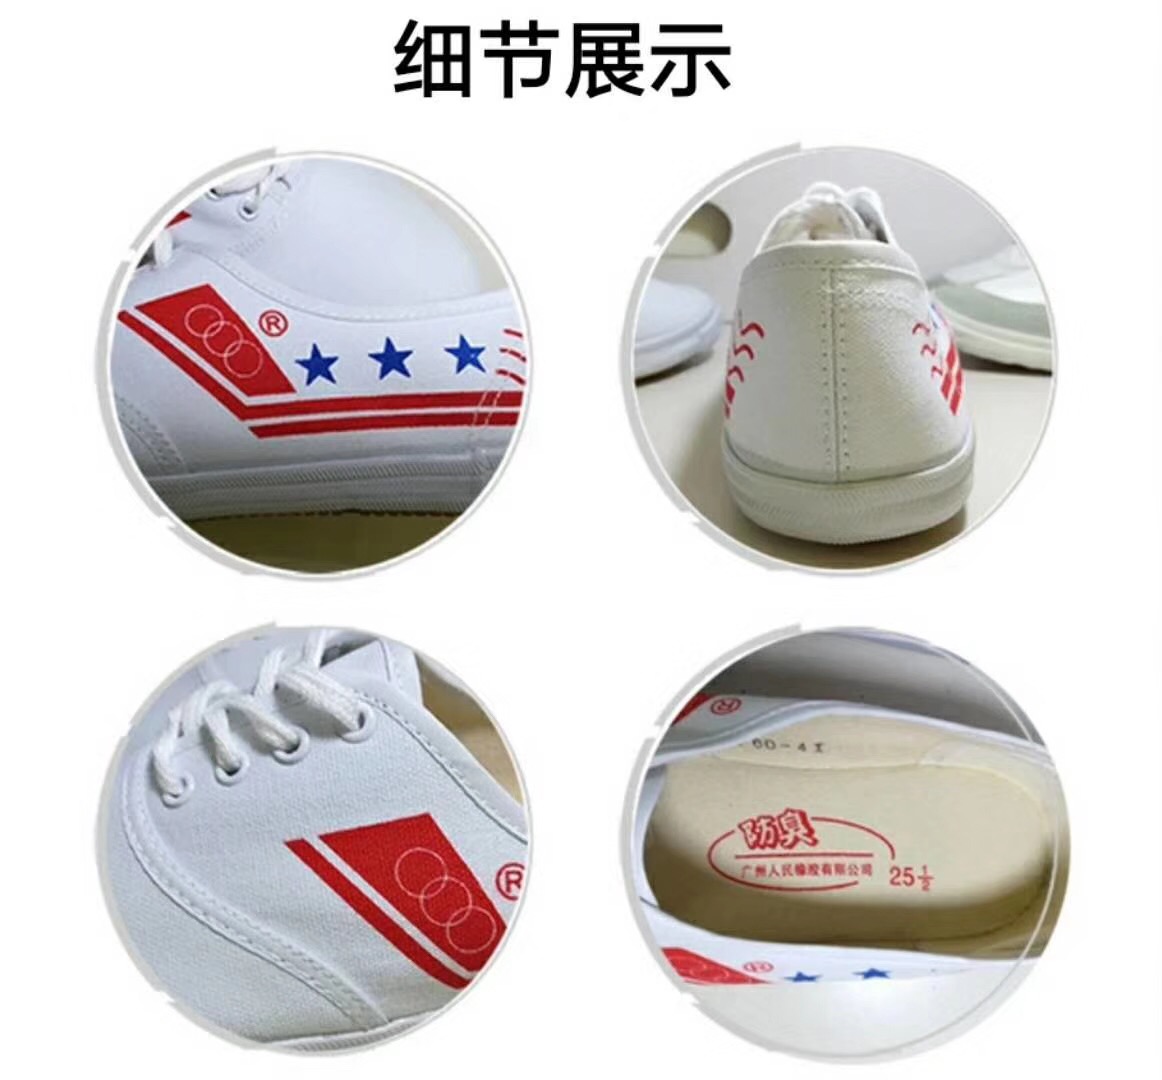 Students white running shoes with star